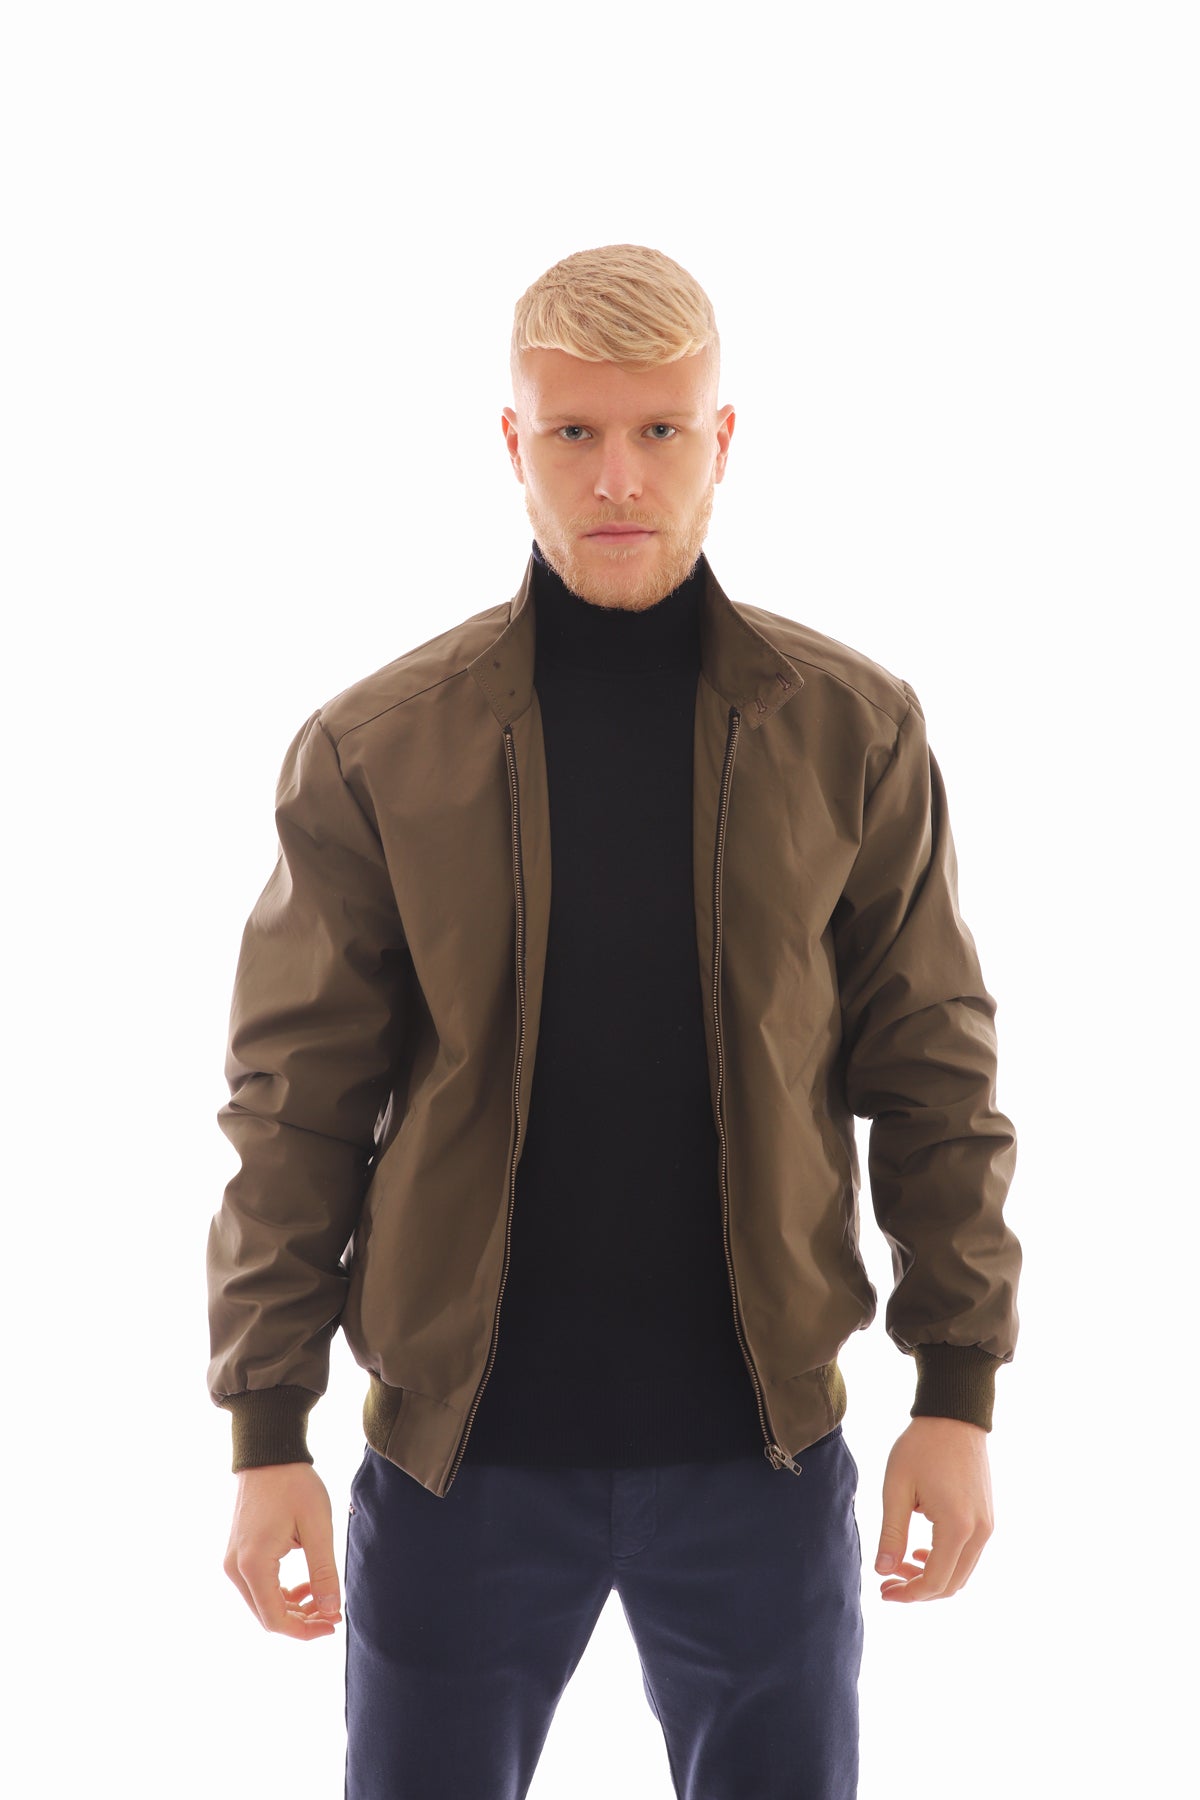 Men's jacket in cotton, ribbed cuffs and waist